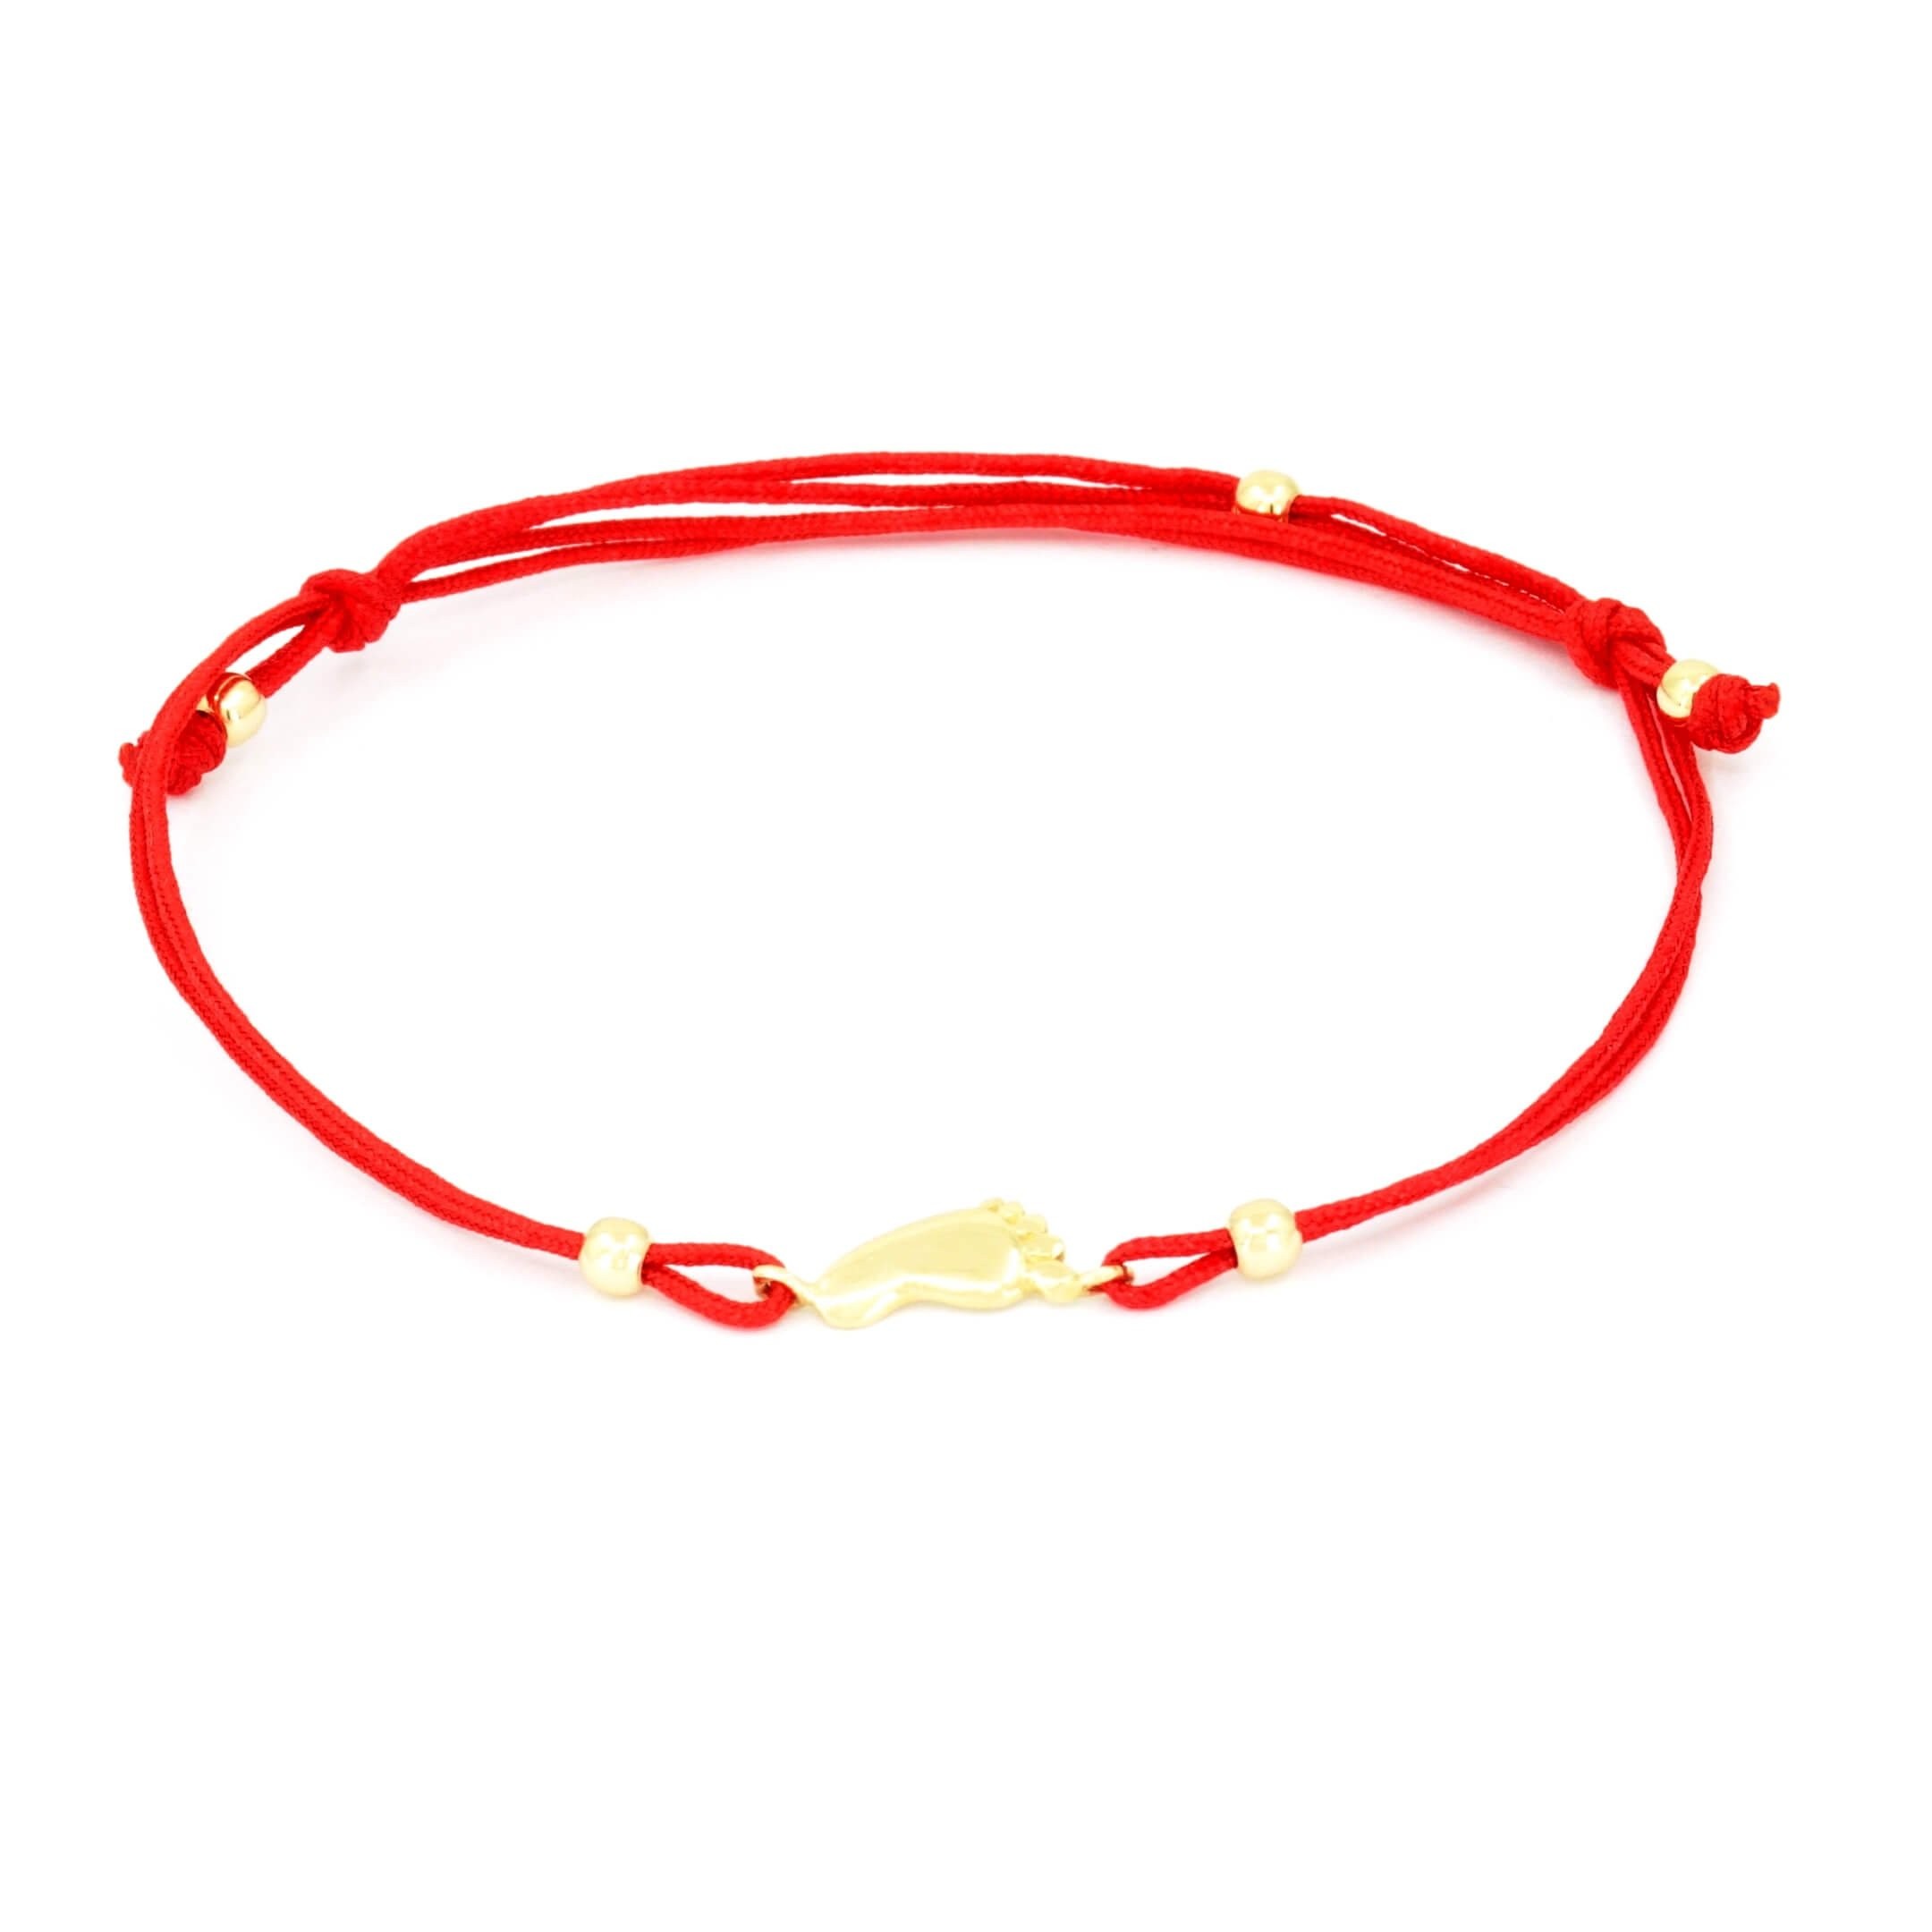 Red cord bracelet with 14K yellow gold baby feet charm